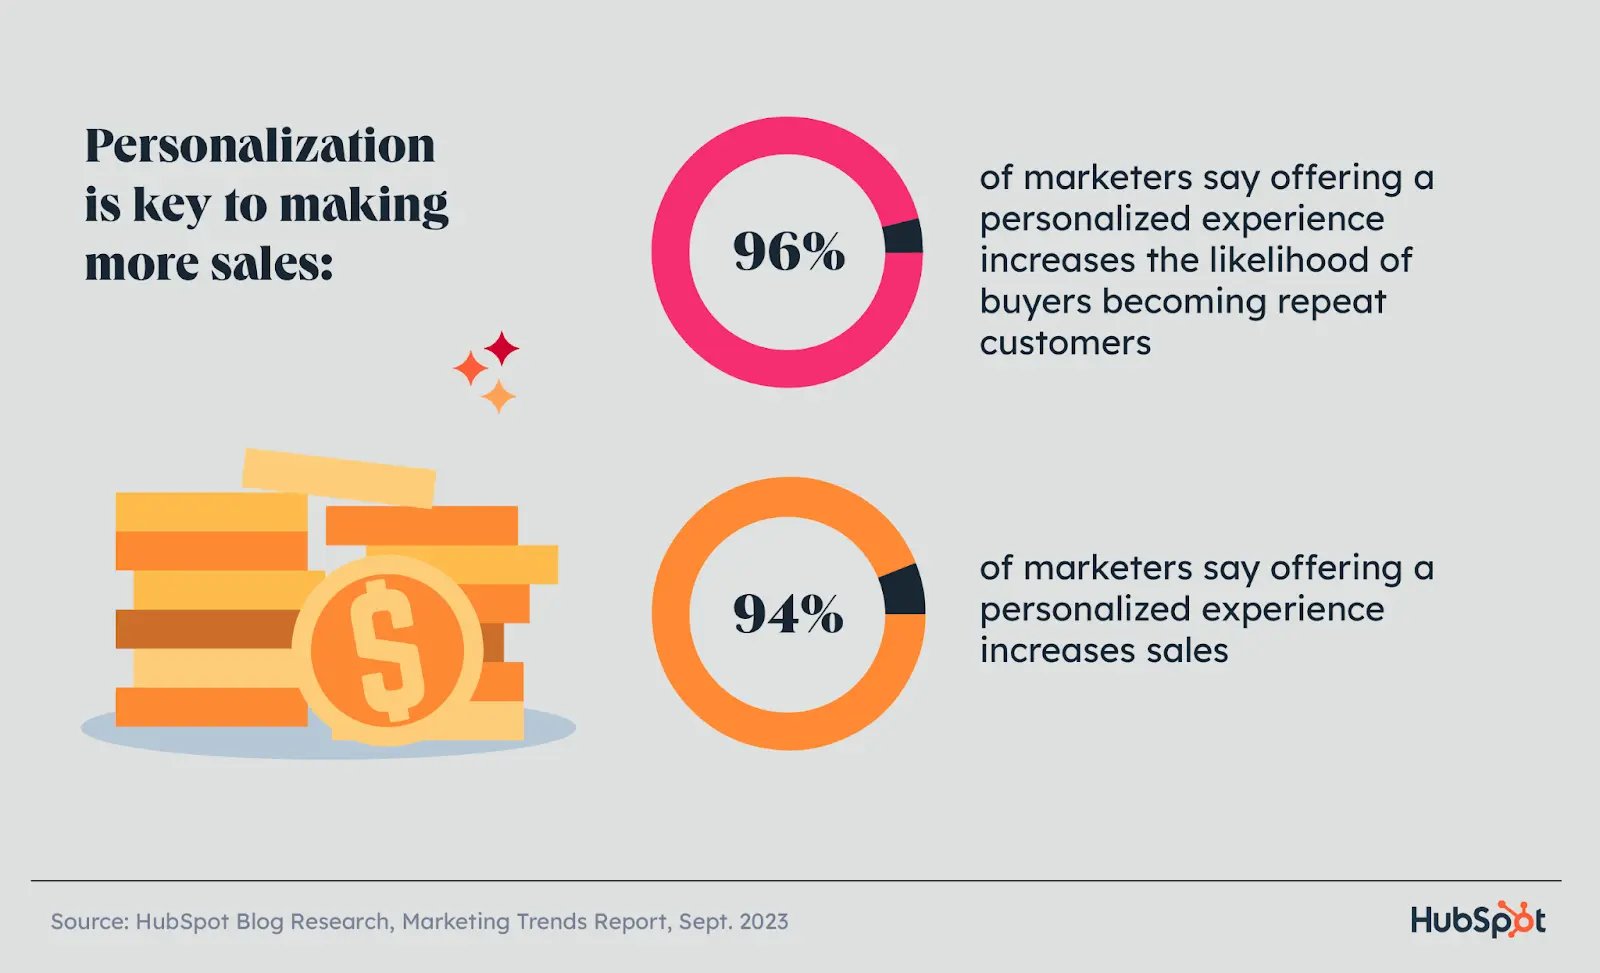 graphic showing that personalization drives more sales